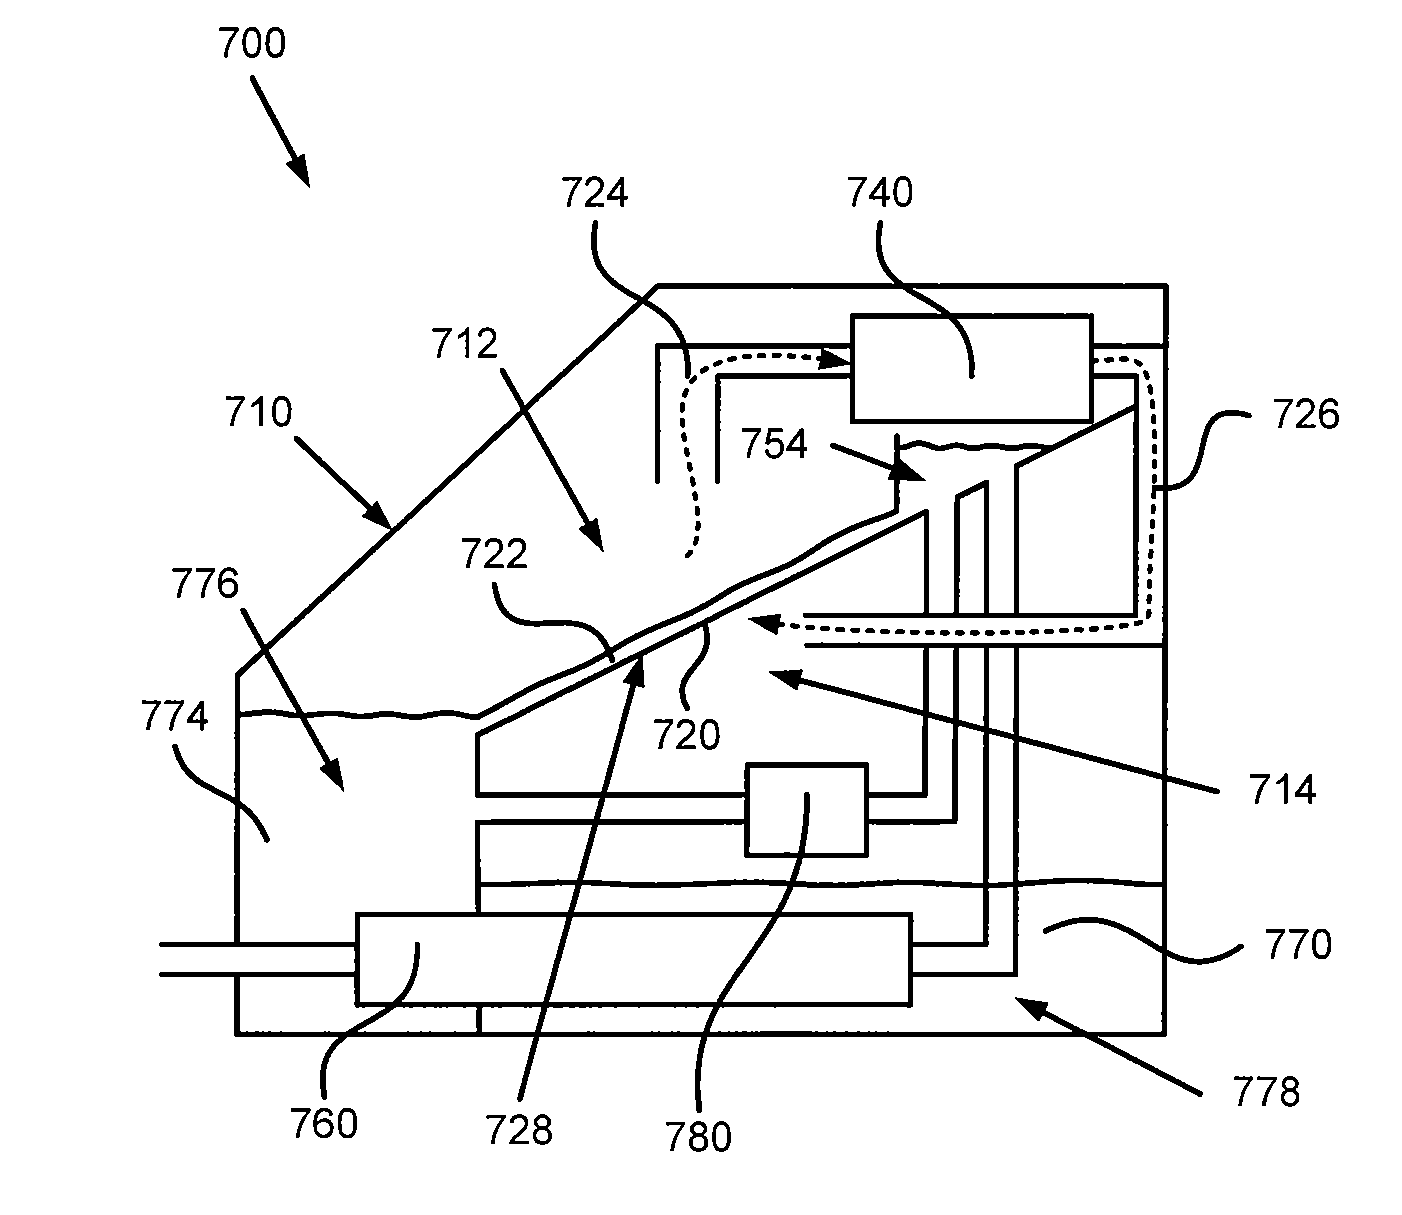 Methods and apparatus for distillation of shallow depth fluids